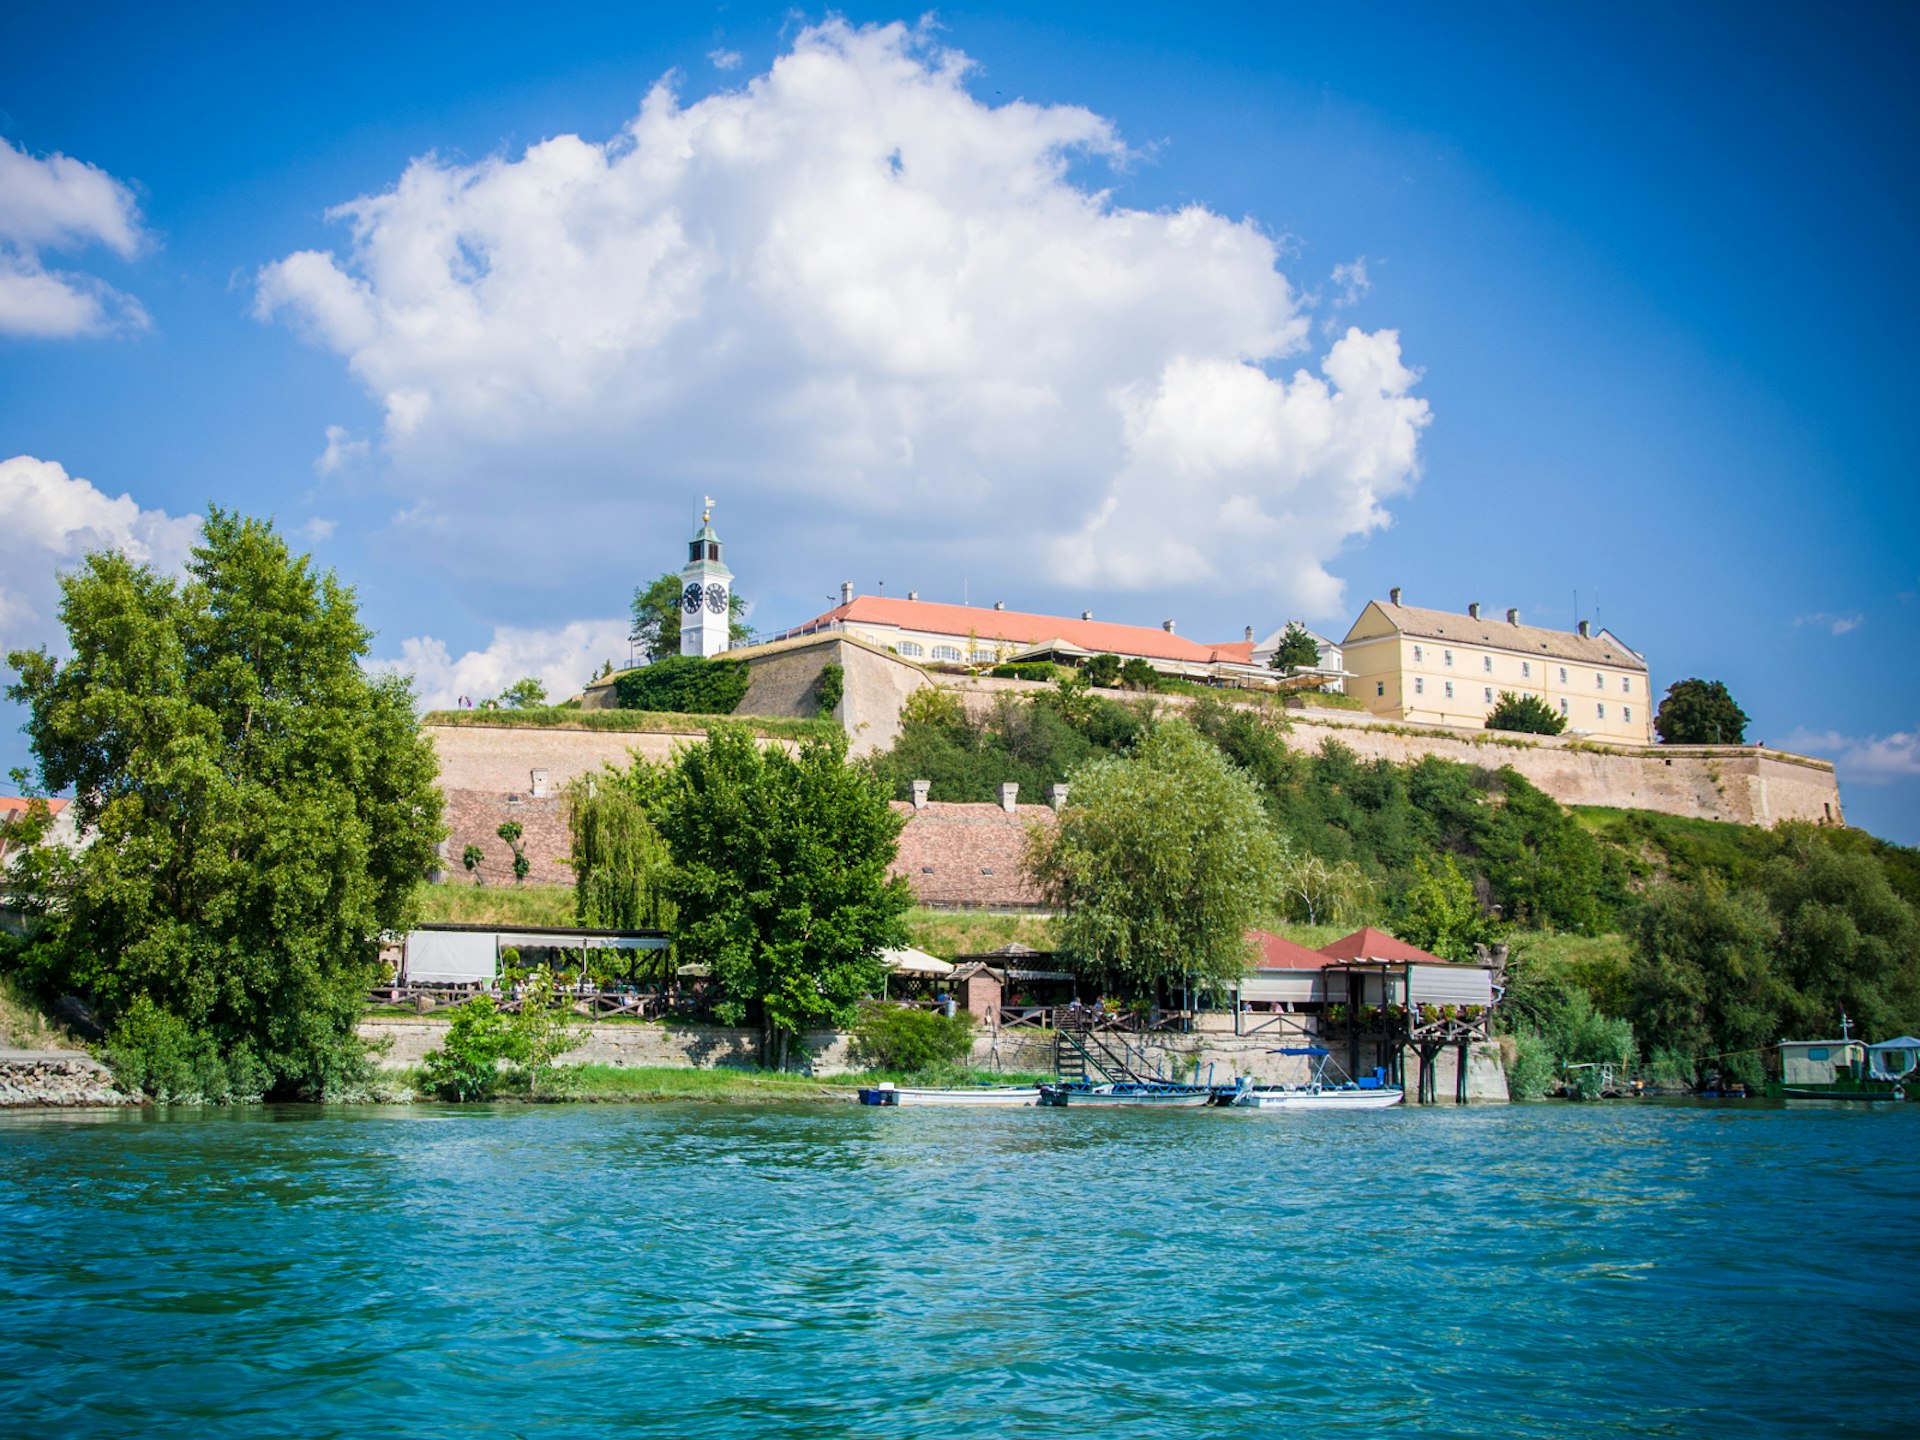 Views of the Petrovaradin Fortress from across the Danube River 